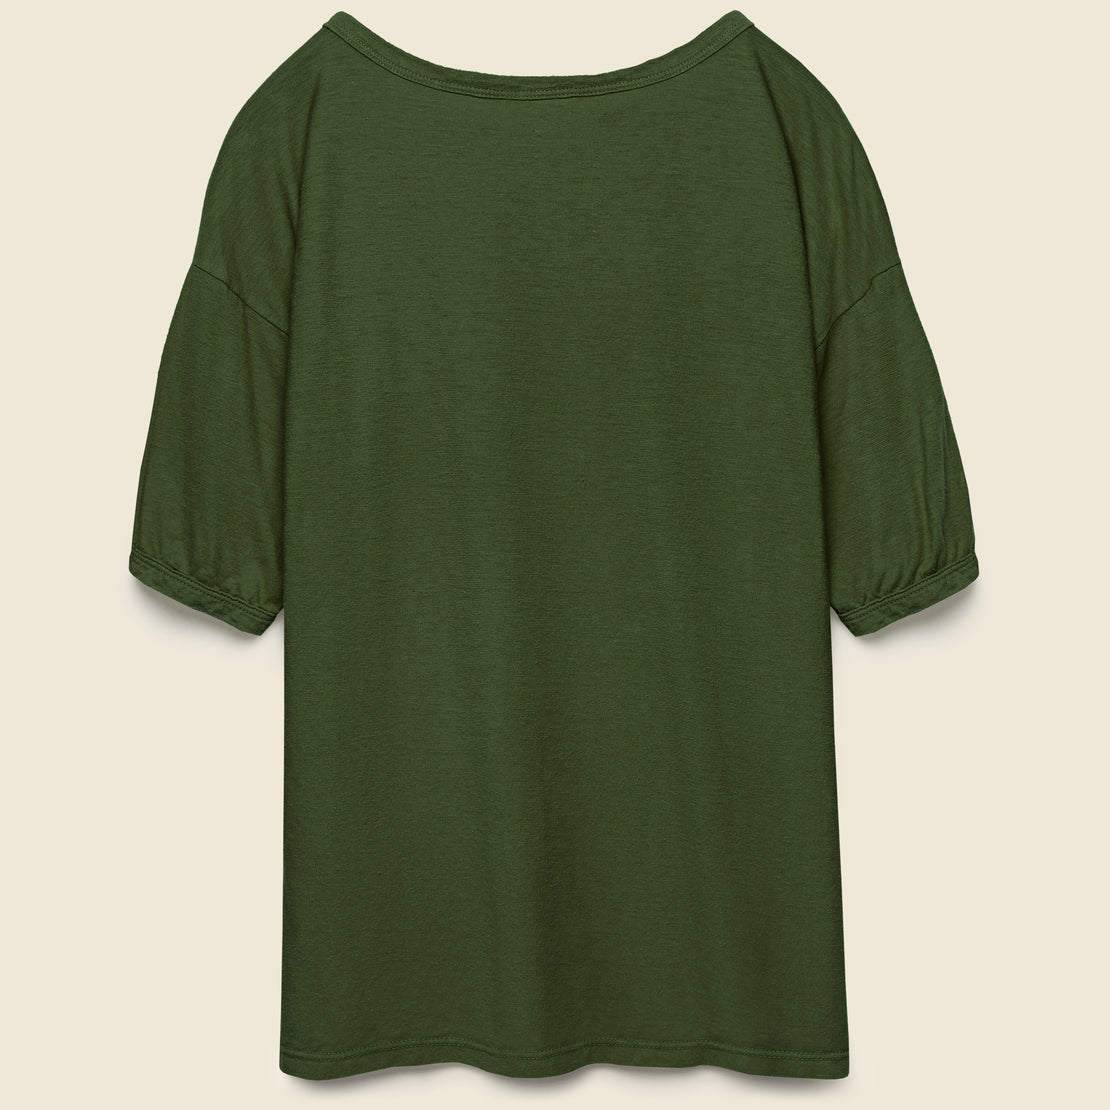 Boxy Tee - Supply Green - Jungmaven - STAG Provisions - W - Tops - S/S Tee